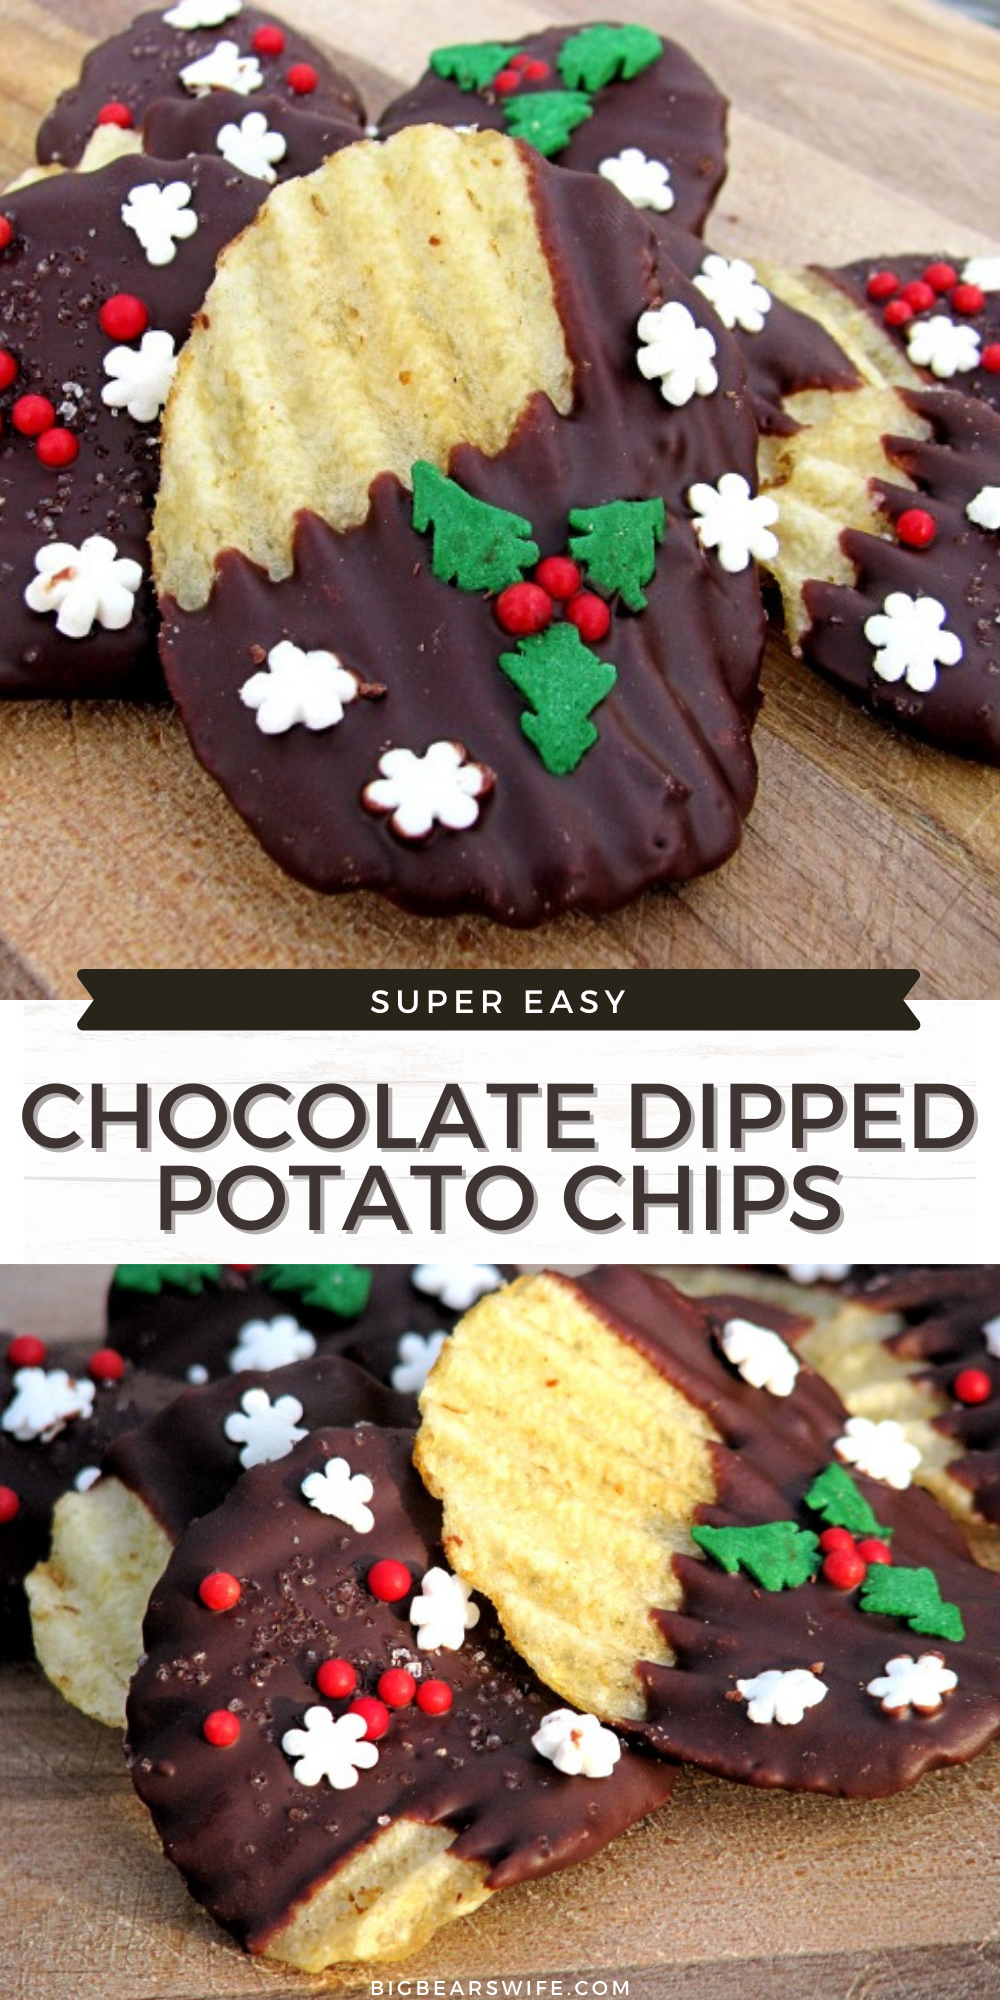 Chocolate Dipped Potato Chips are a super easy treat to make at home! Perfect for Holiday Dessert trays and homemade Christmas gifts!  via @bigbearswife